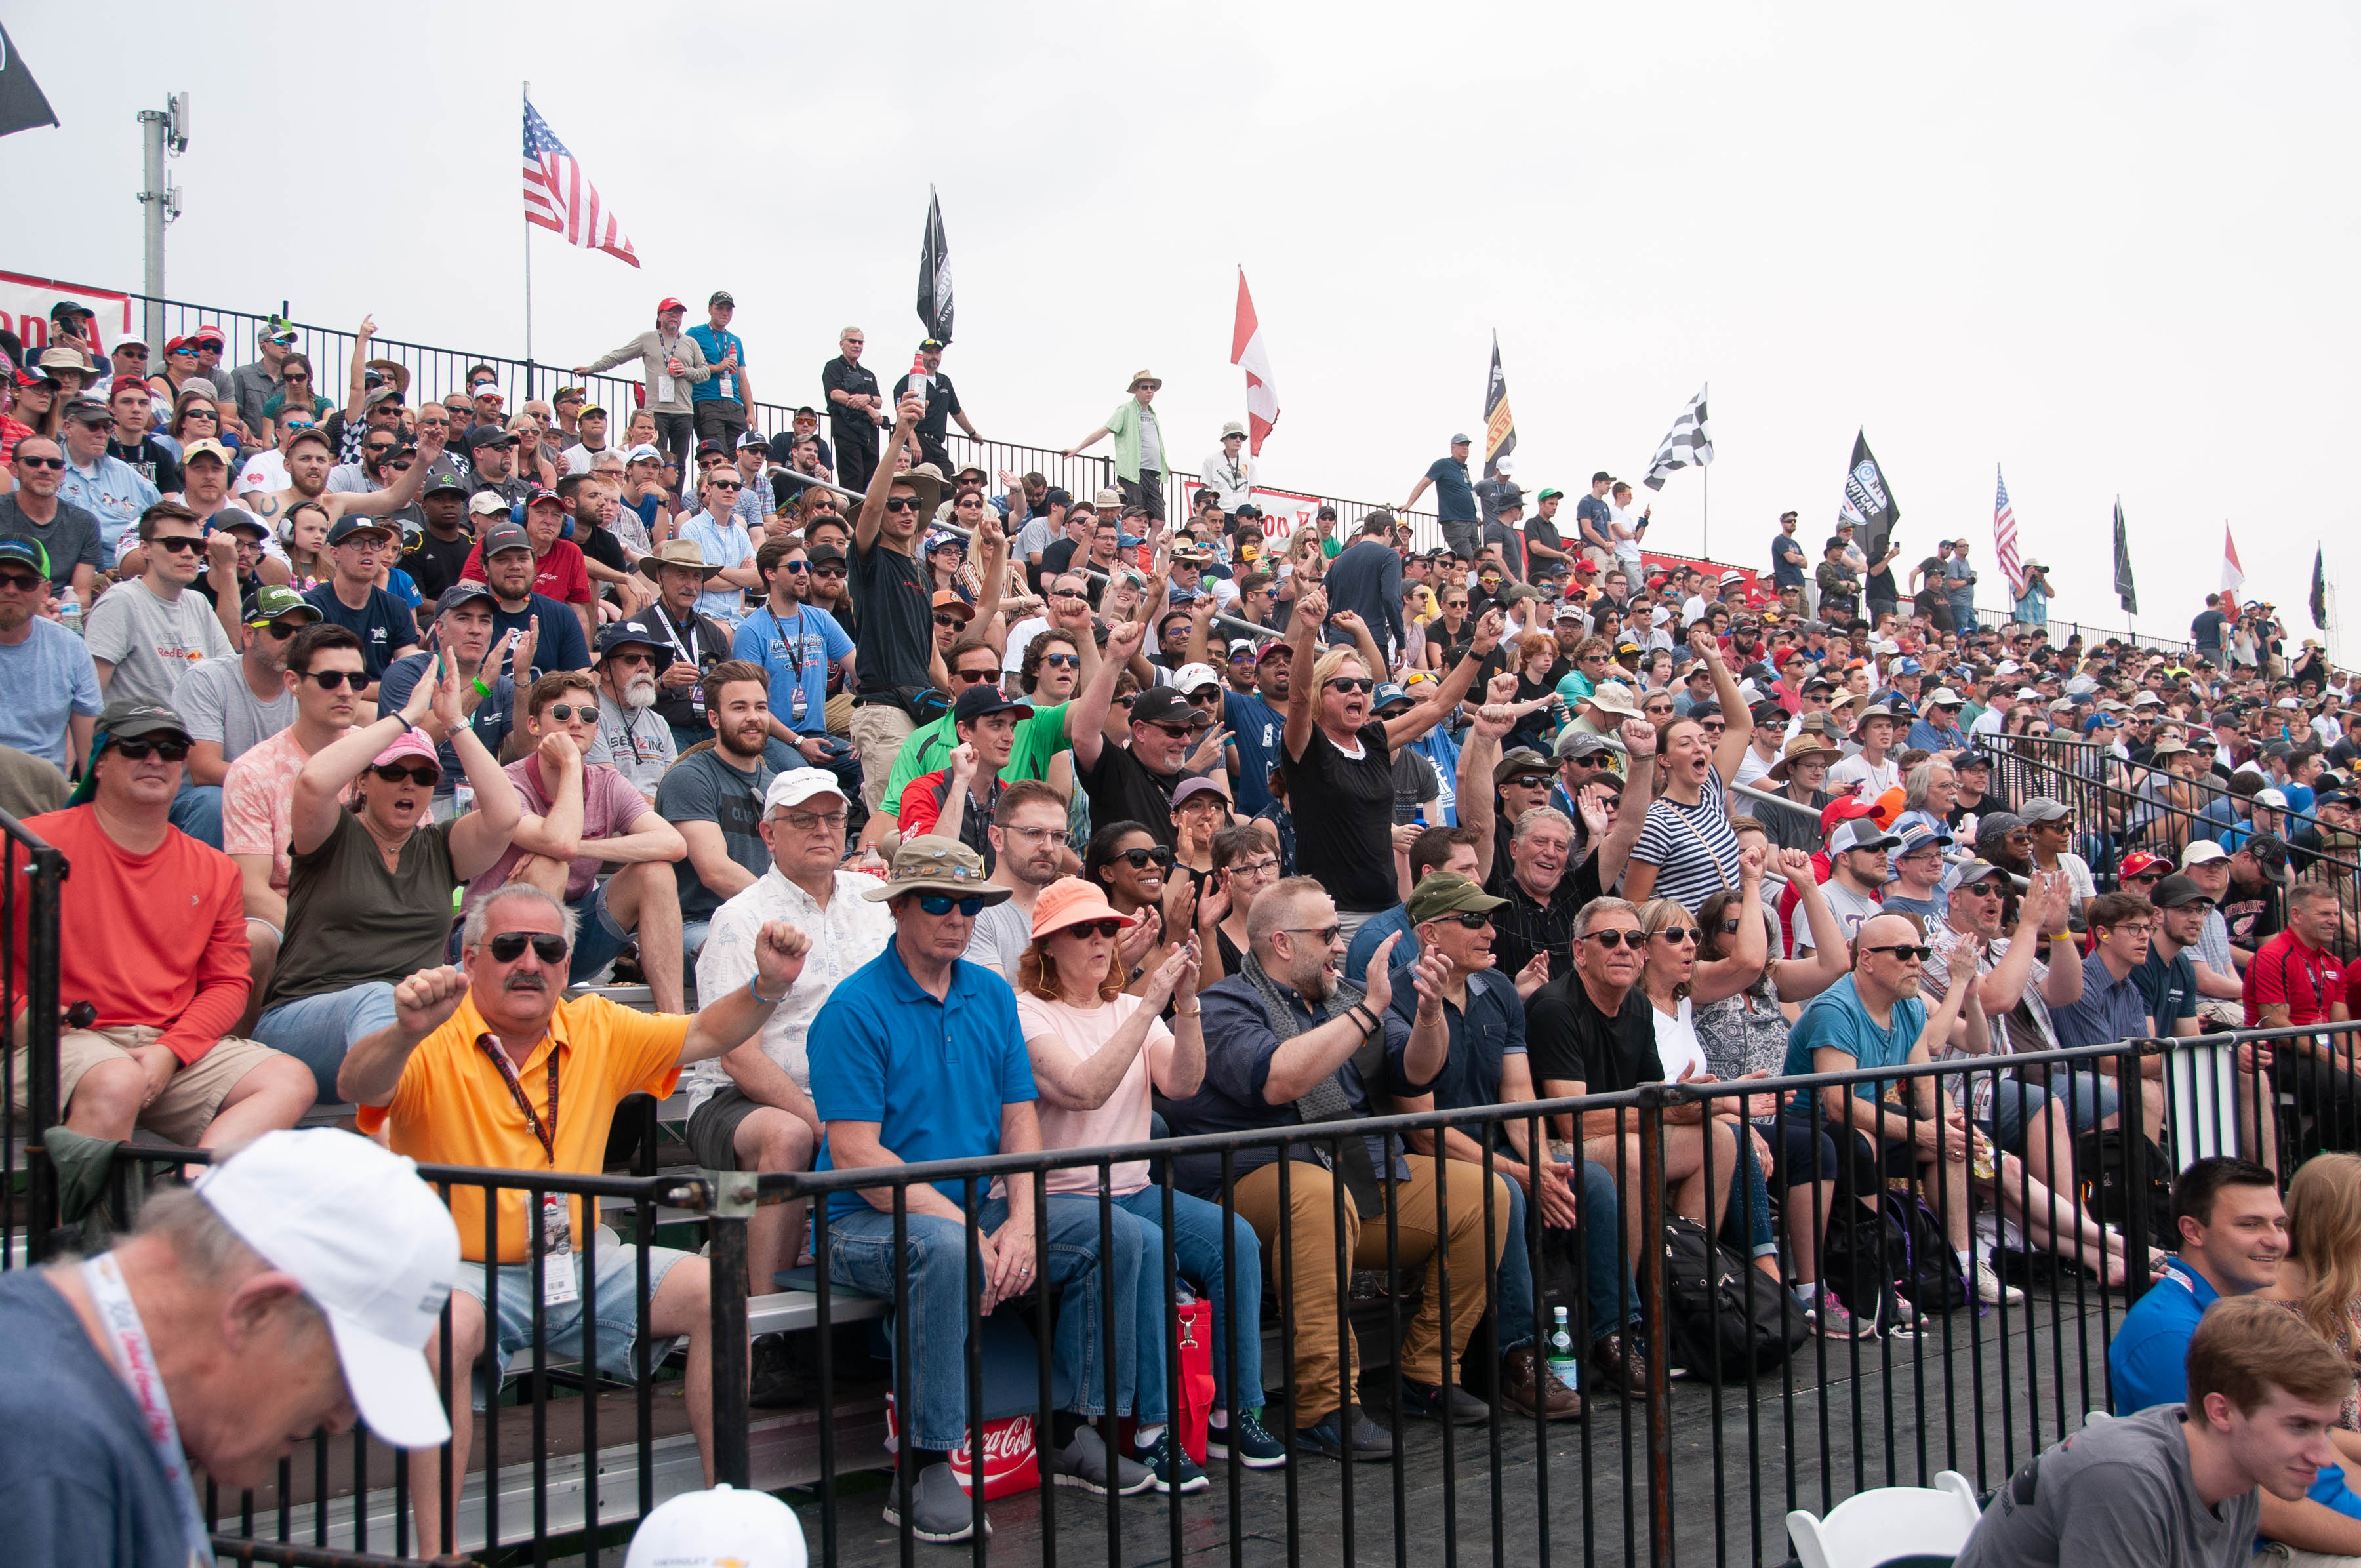 Results Reveal Impressive Total Numbers for the 2019 Chevrolet Detroit Grand Prix presented by Lear